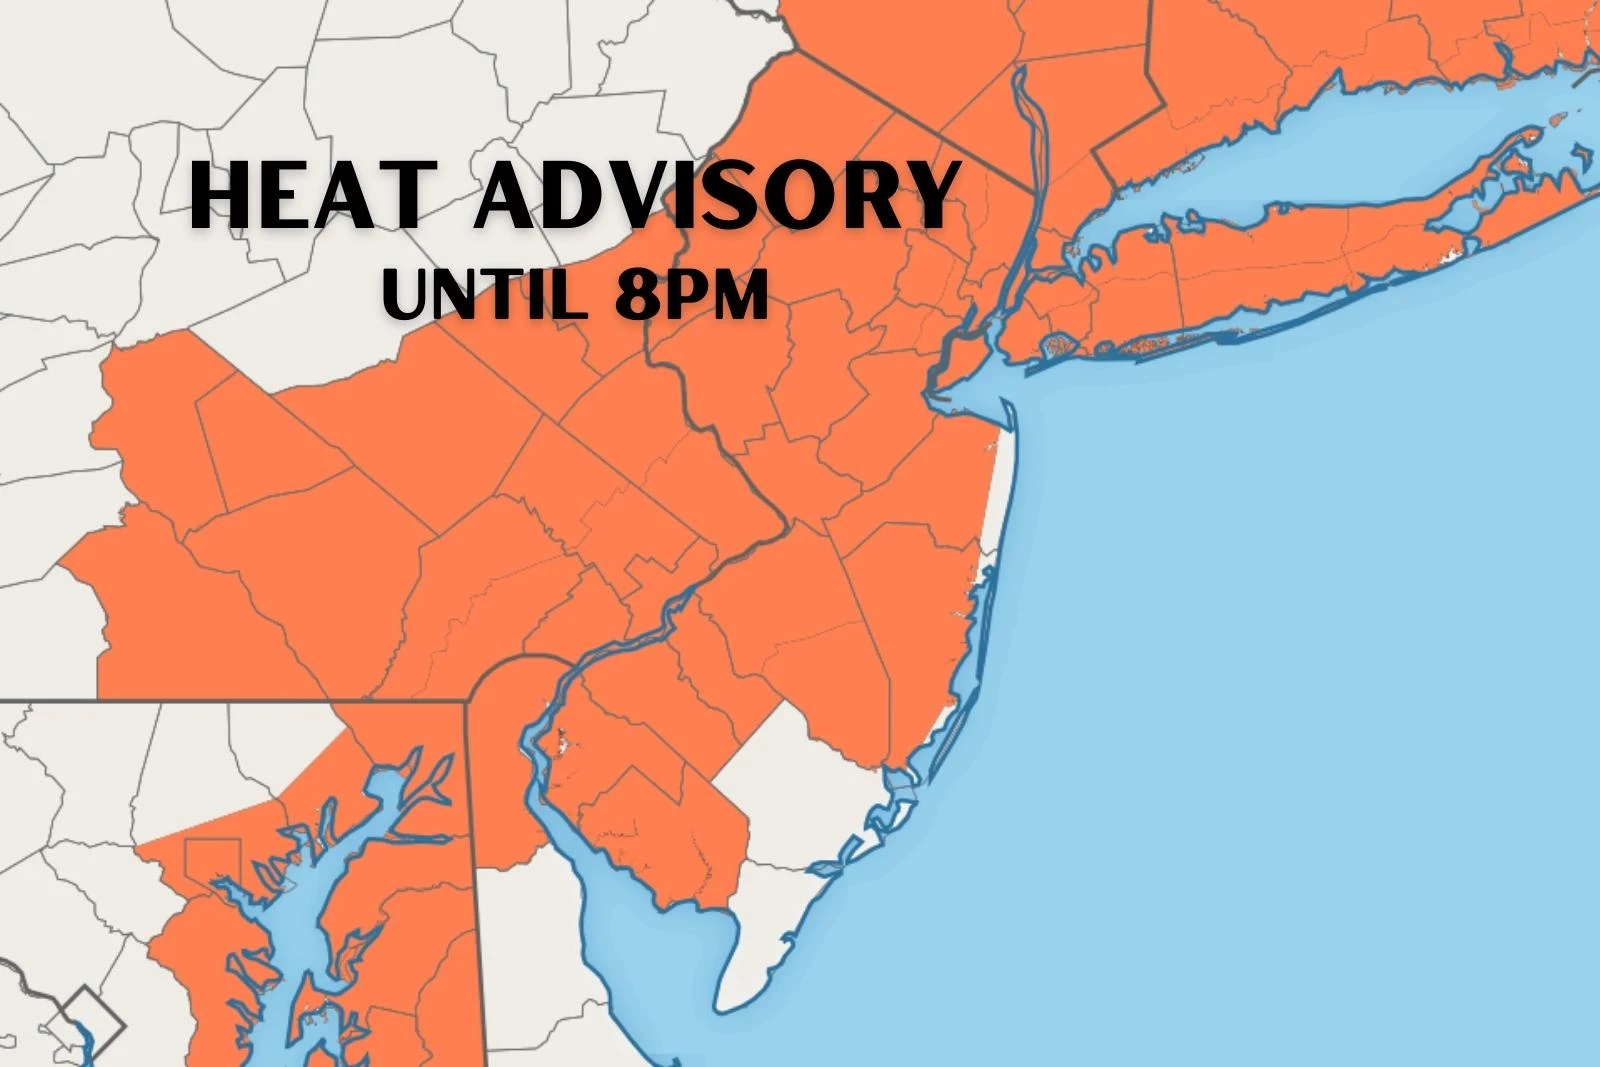 NJ weather: One more day of dangerous heat, sweet relief coming